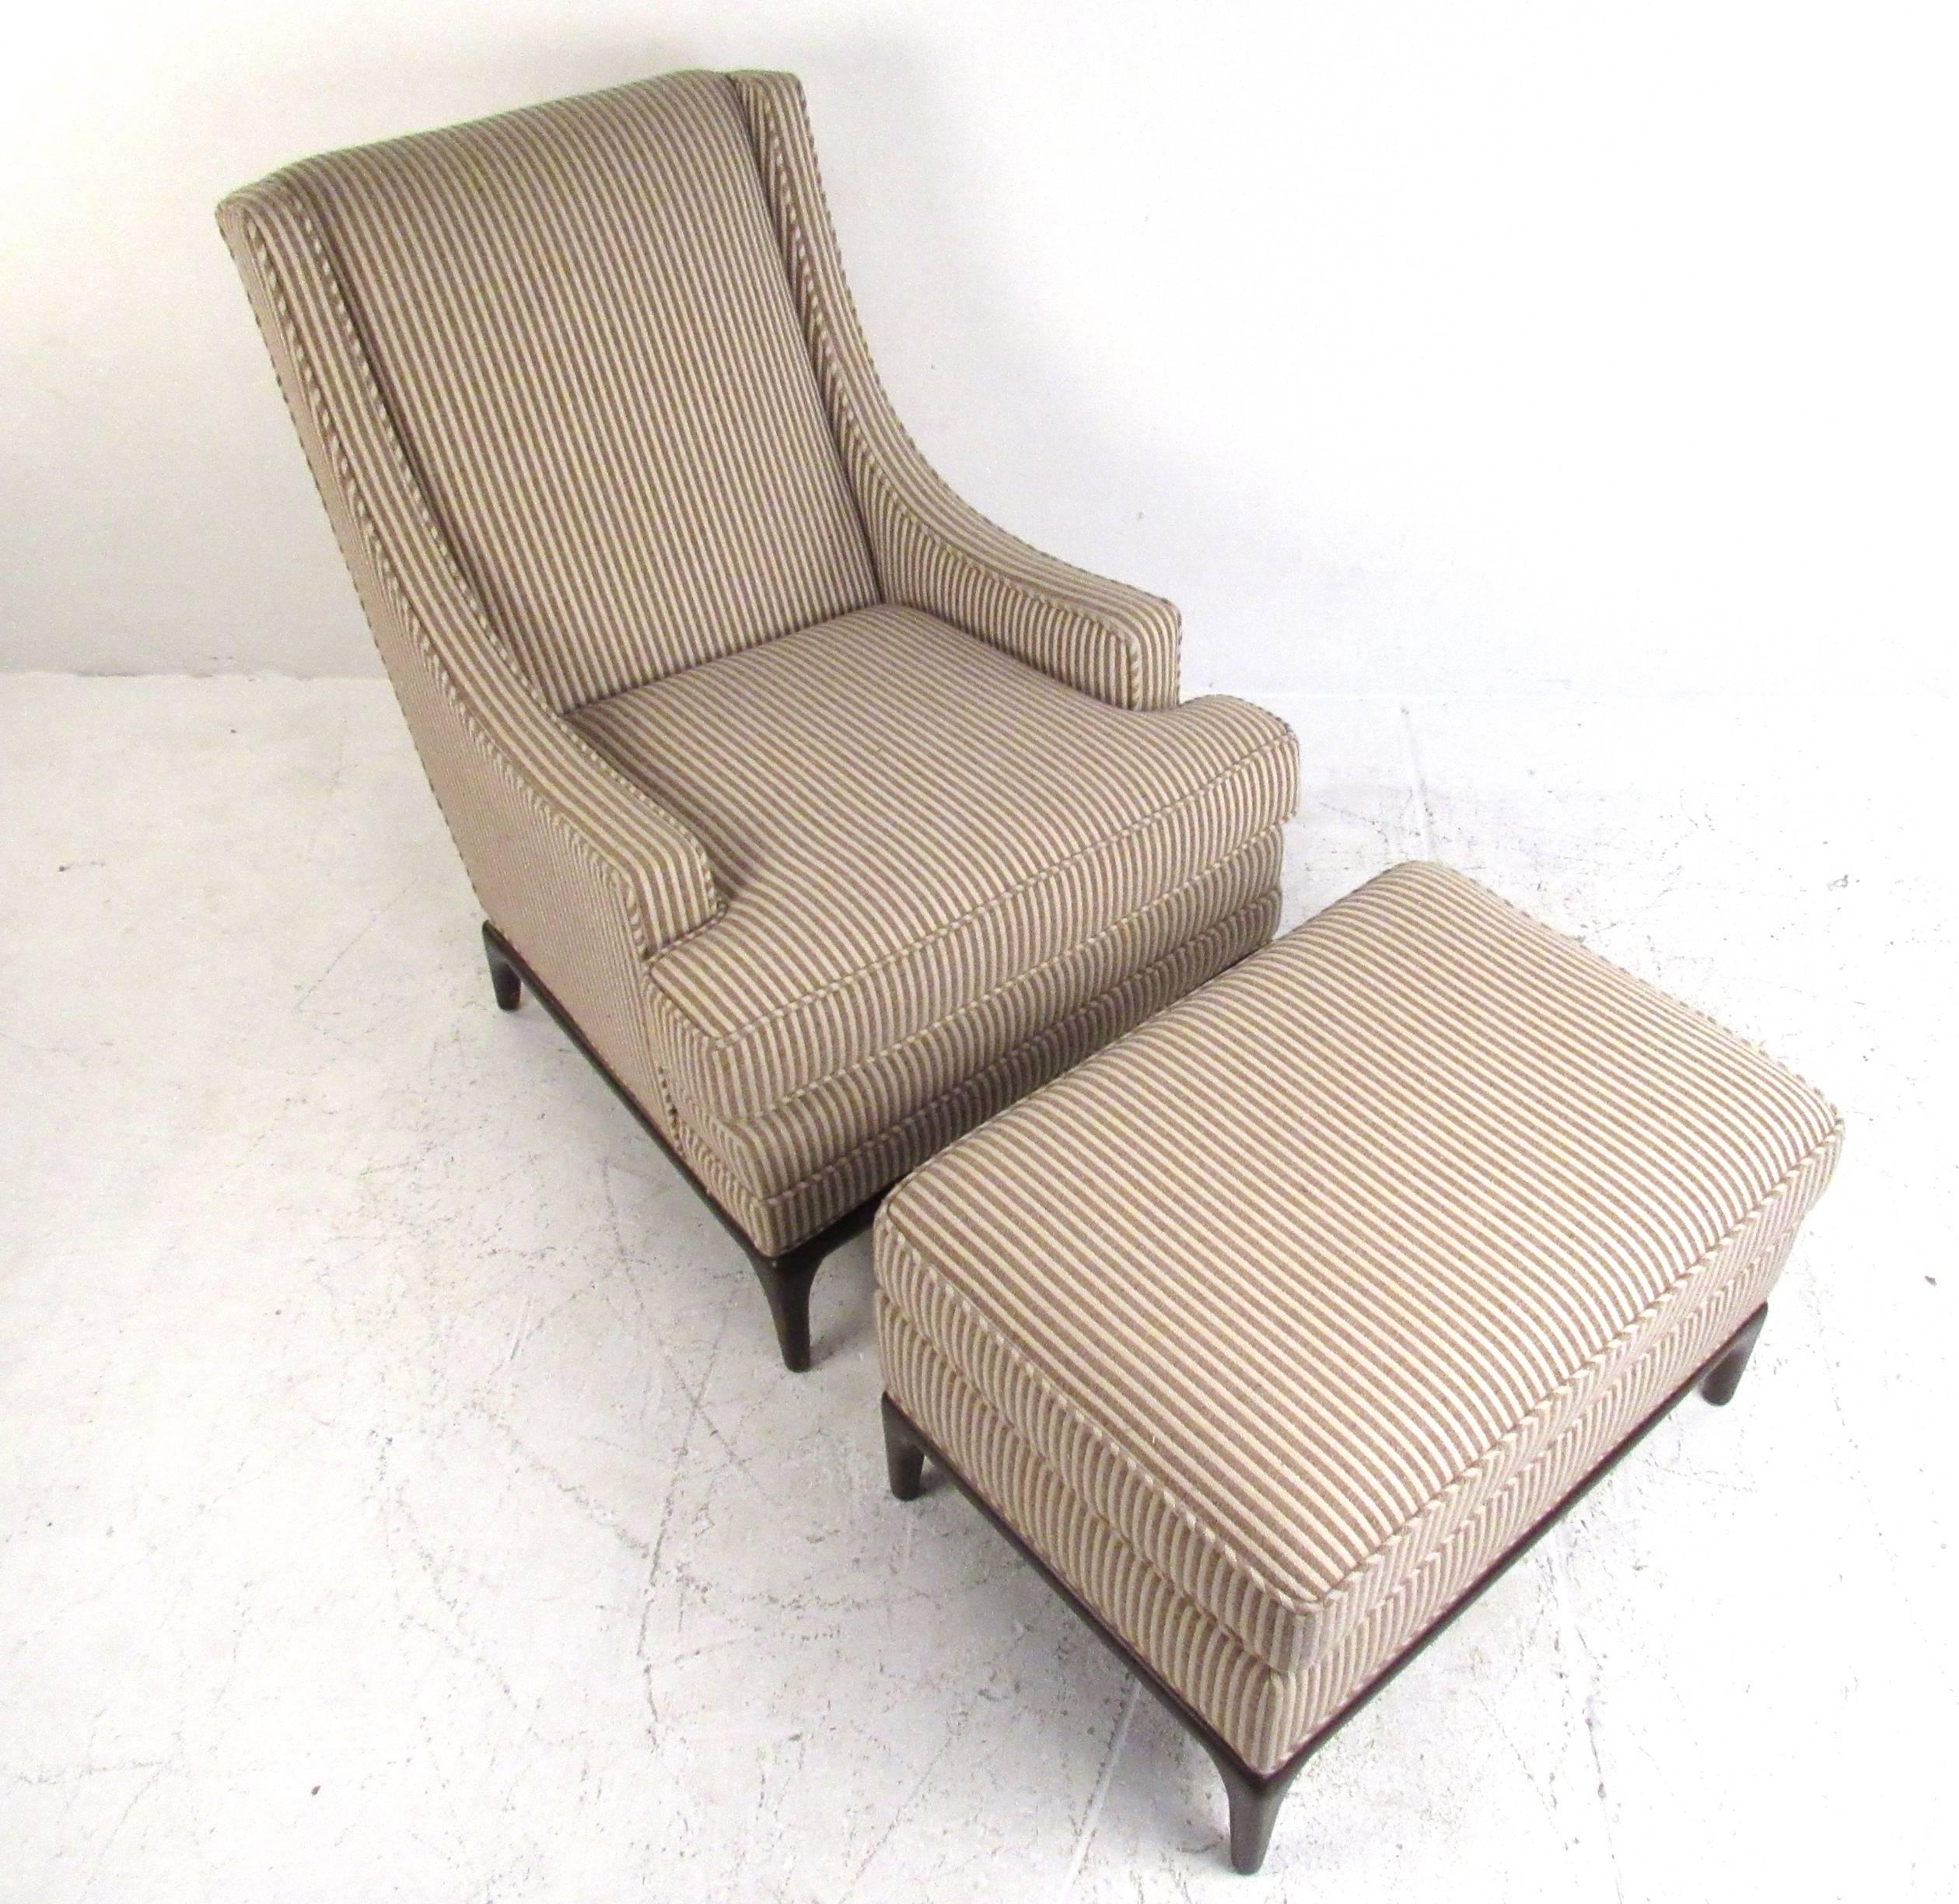 This vintage lounge chair features a unique sculpted design with high seat back and low-profile armrests. Tapered hardwood bases and vintage fabric add to the Mid-Century appeal of this Robsjohn-Gibbings style chair with matching ottoman. Please